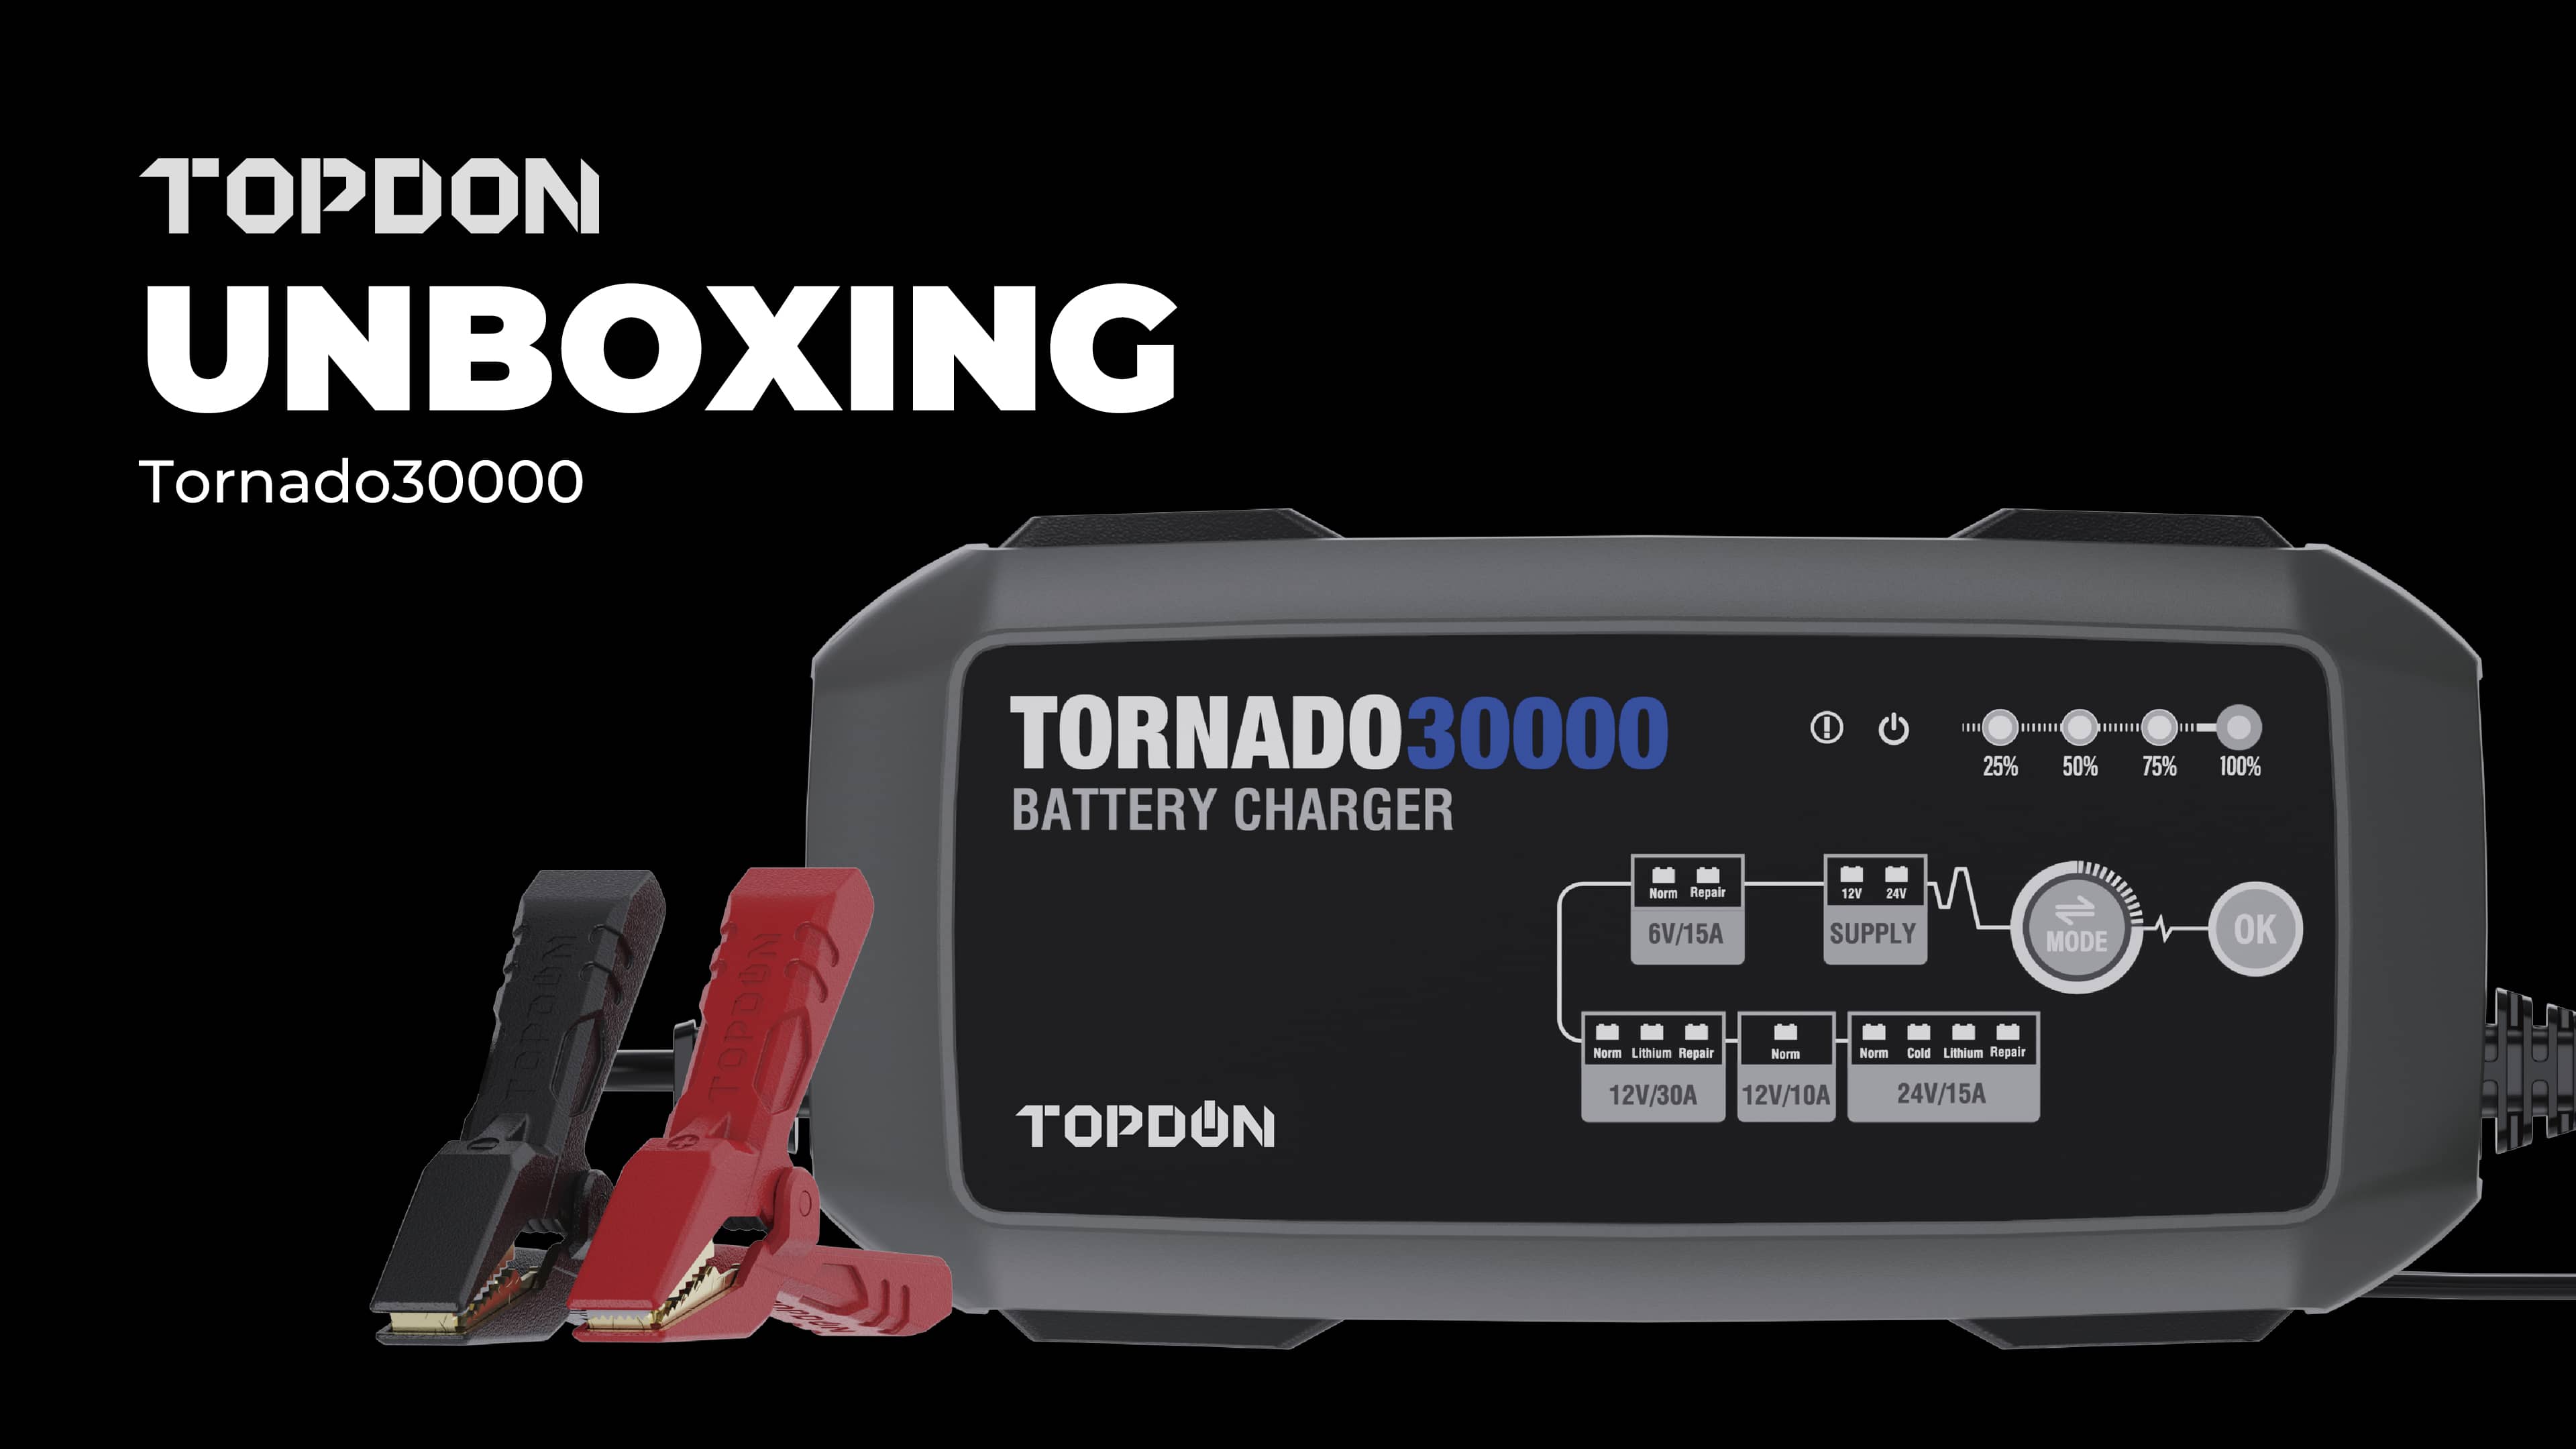 What’s In the TOPDON Battery Charger Tornado30000 Box?